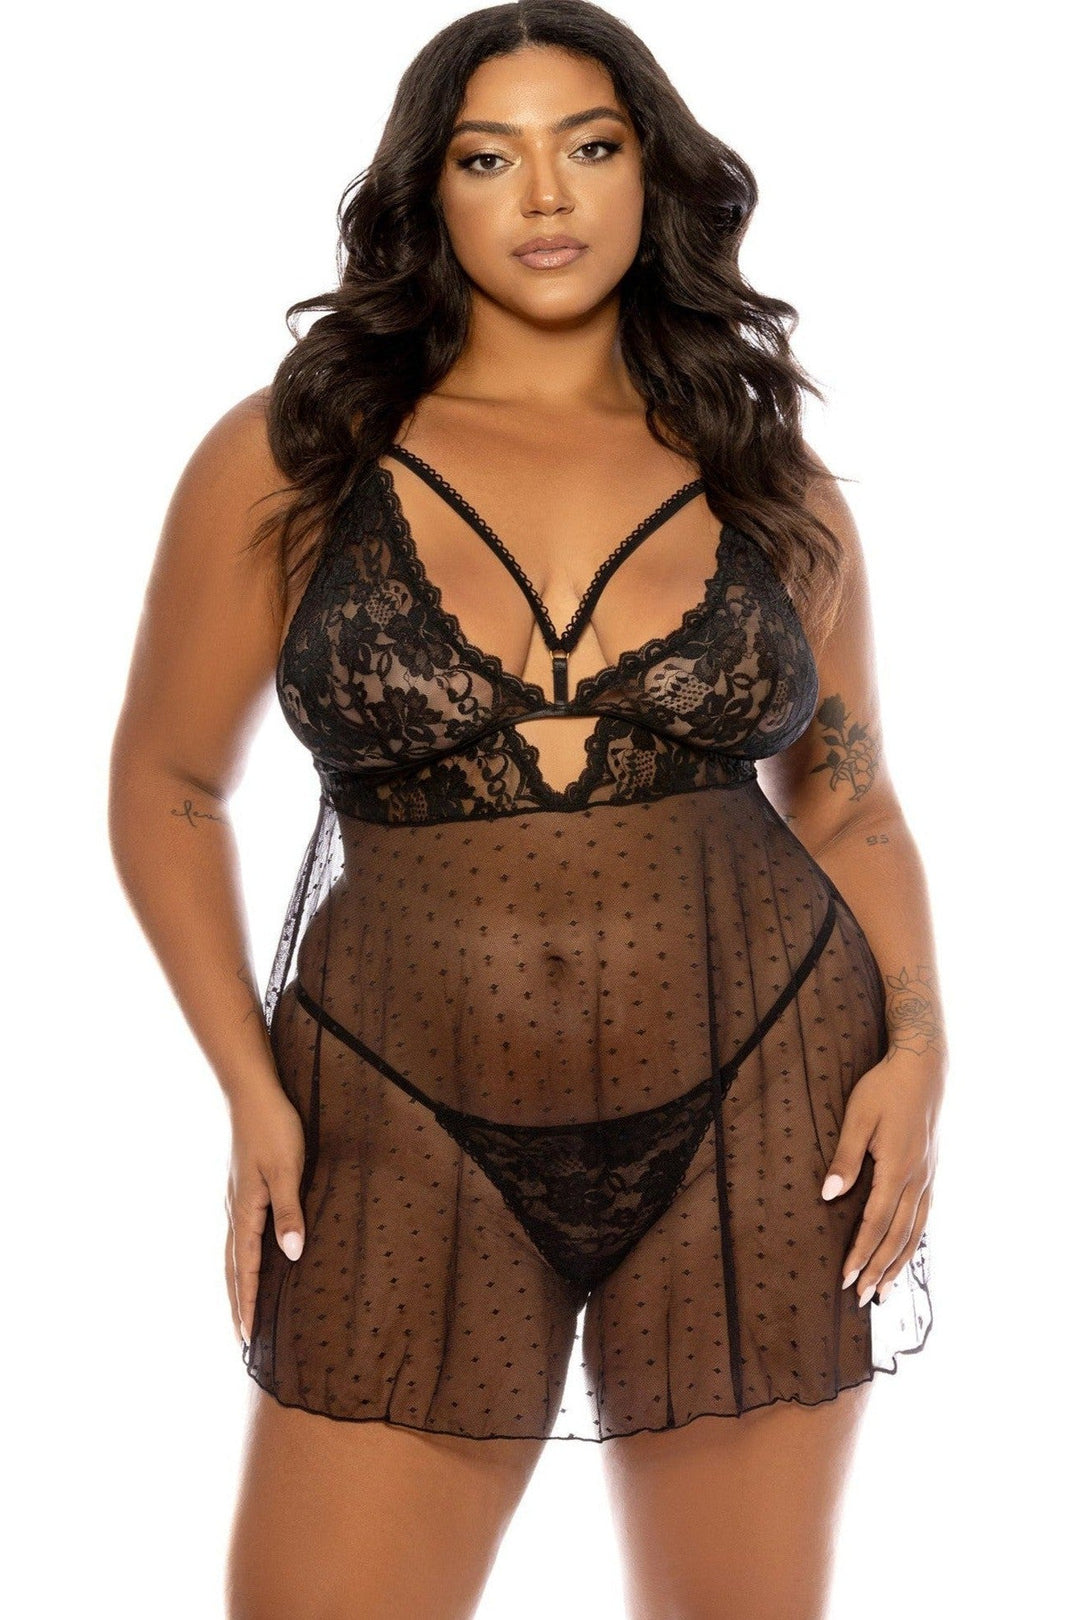 Soft Cup Lace Babydoll with Decorative Elastic Details and Matching Panty | Plus Size Black